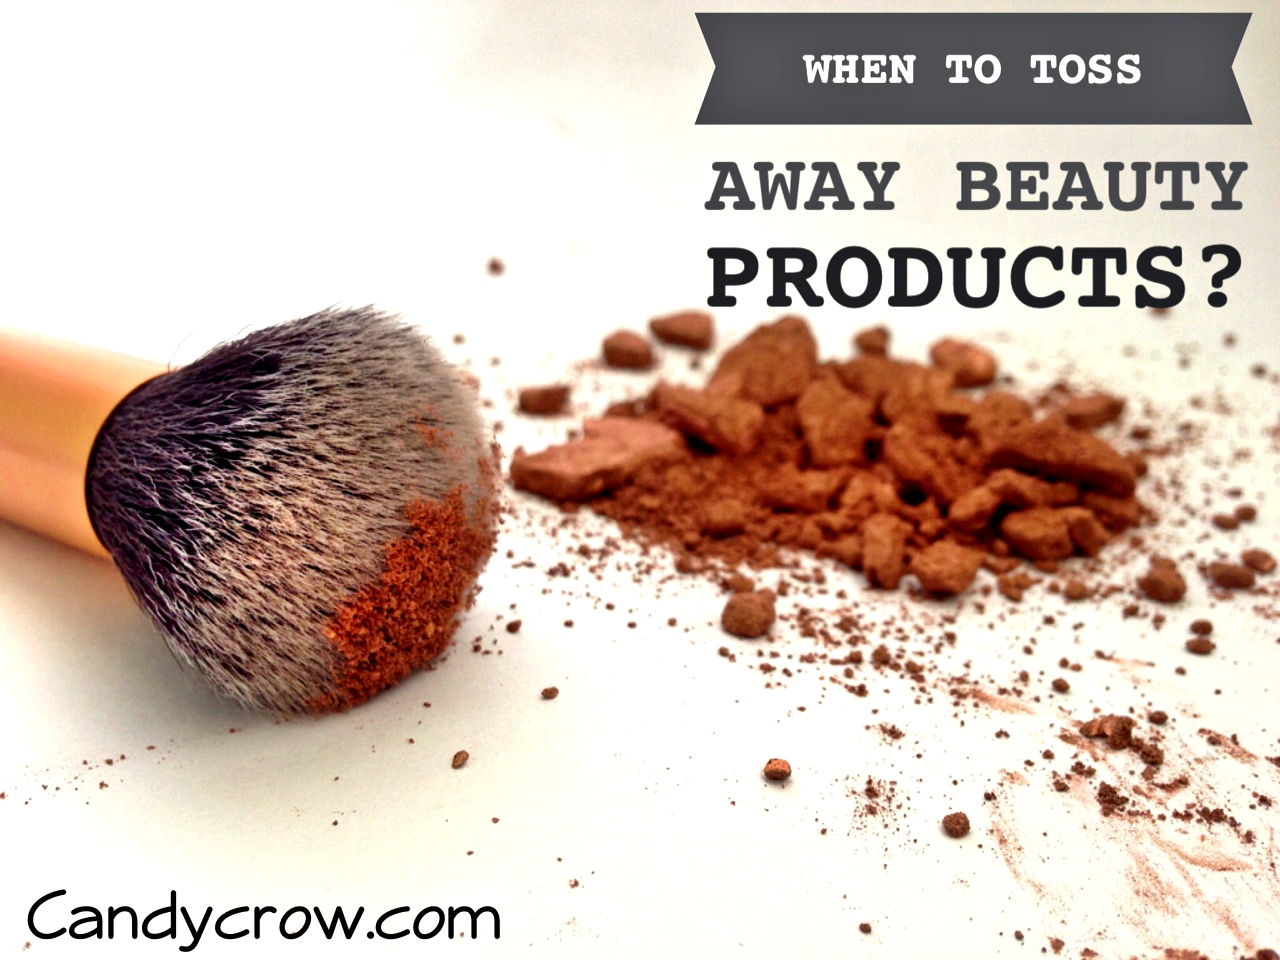 When to Toss Away Your Beauty Products?